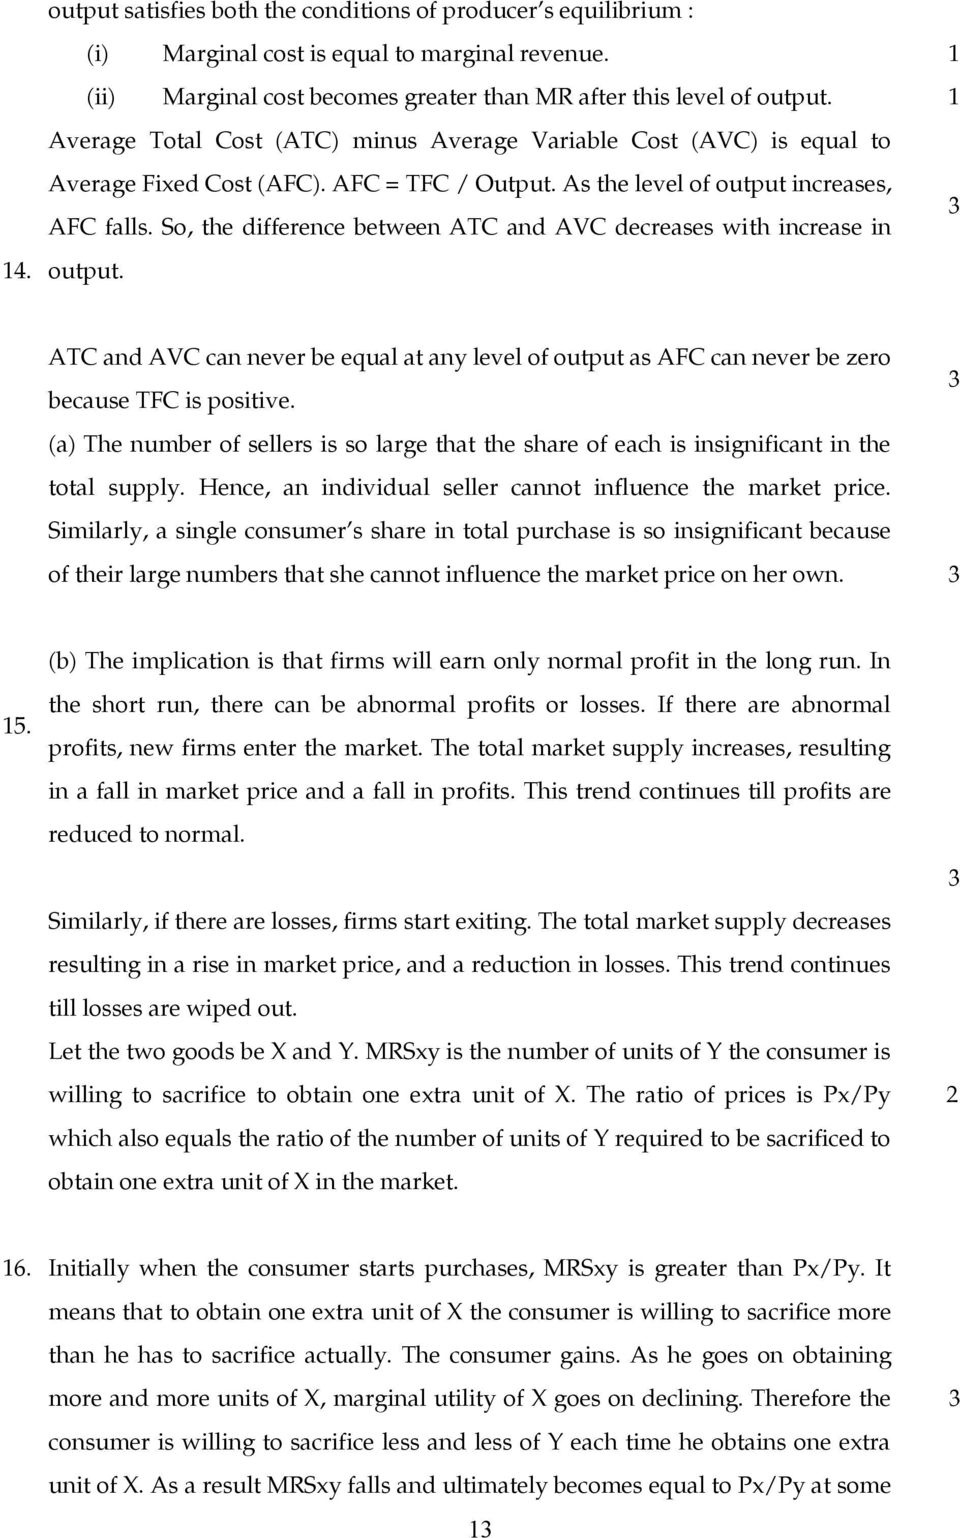 So, the difference between ATC and AVC decreases with increase in output. 1 1 3 ATC and AVC can never be equal at any level of output as AFC can never be zero because TFC is positive.